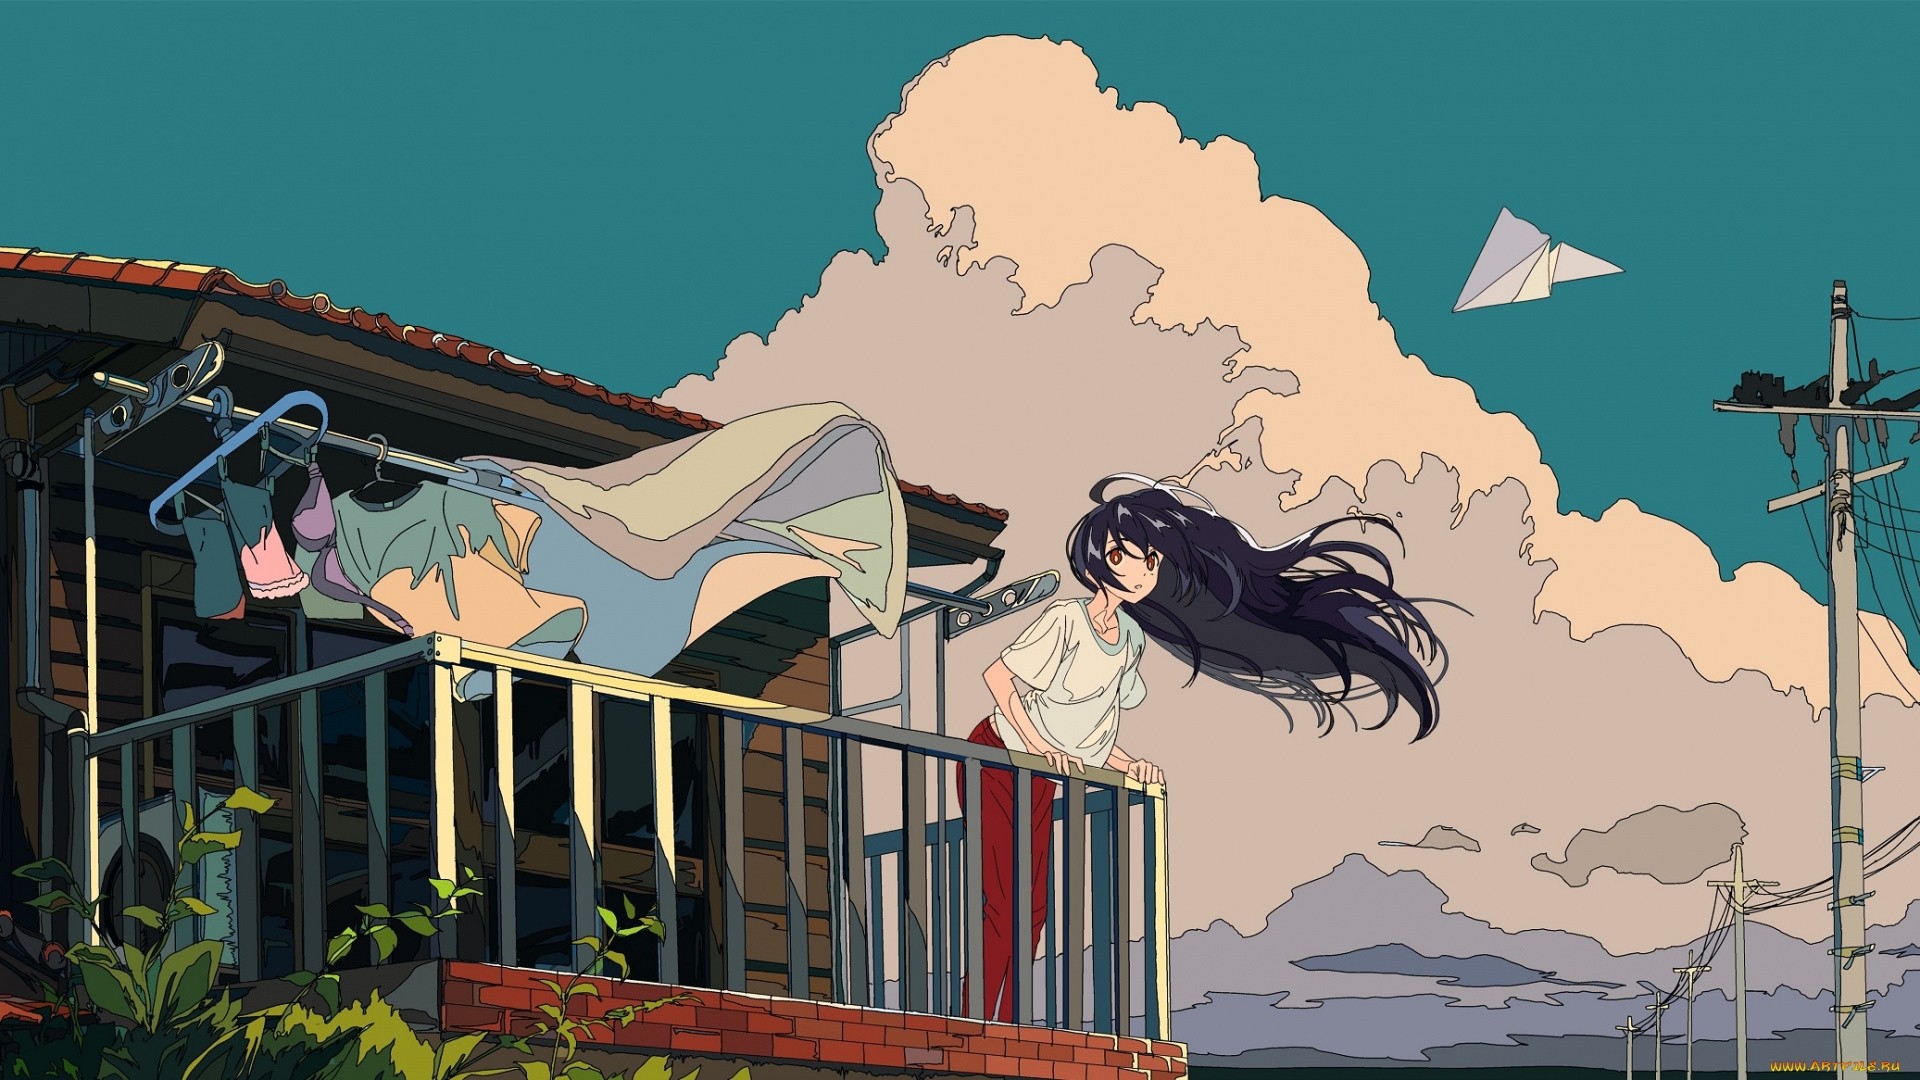 The Anime Styles Print  Flora Sweet Balcony Poster for Sale by  RichardSawyers  Redbubble